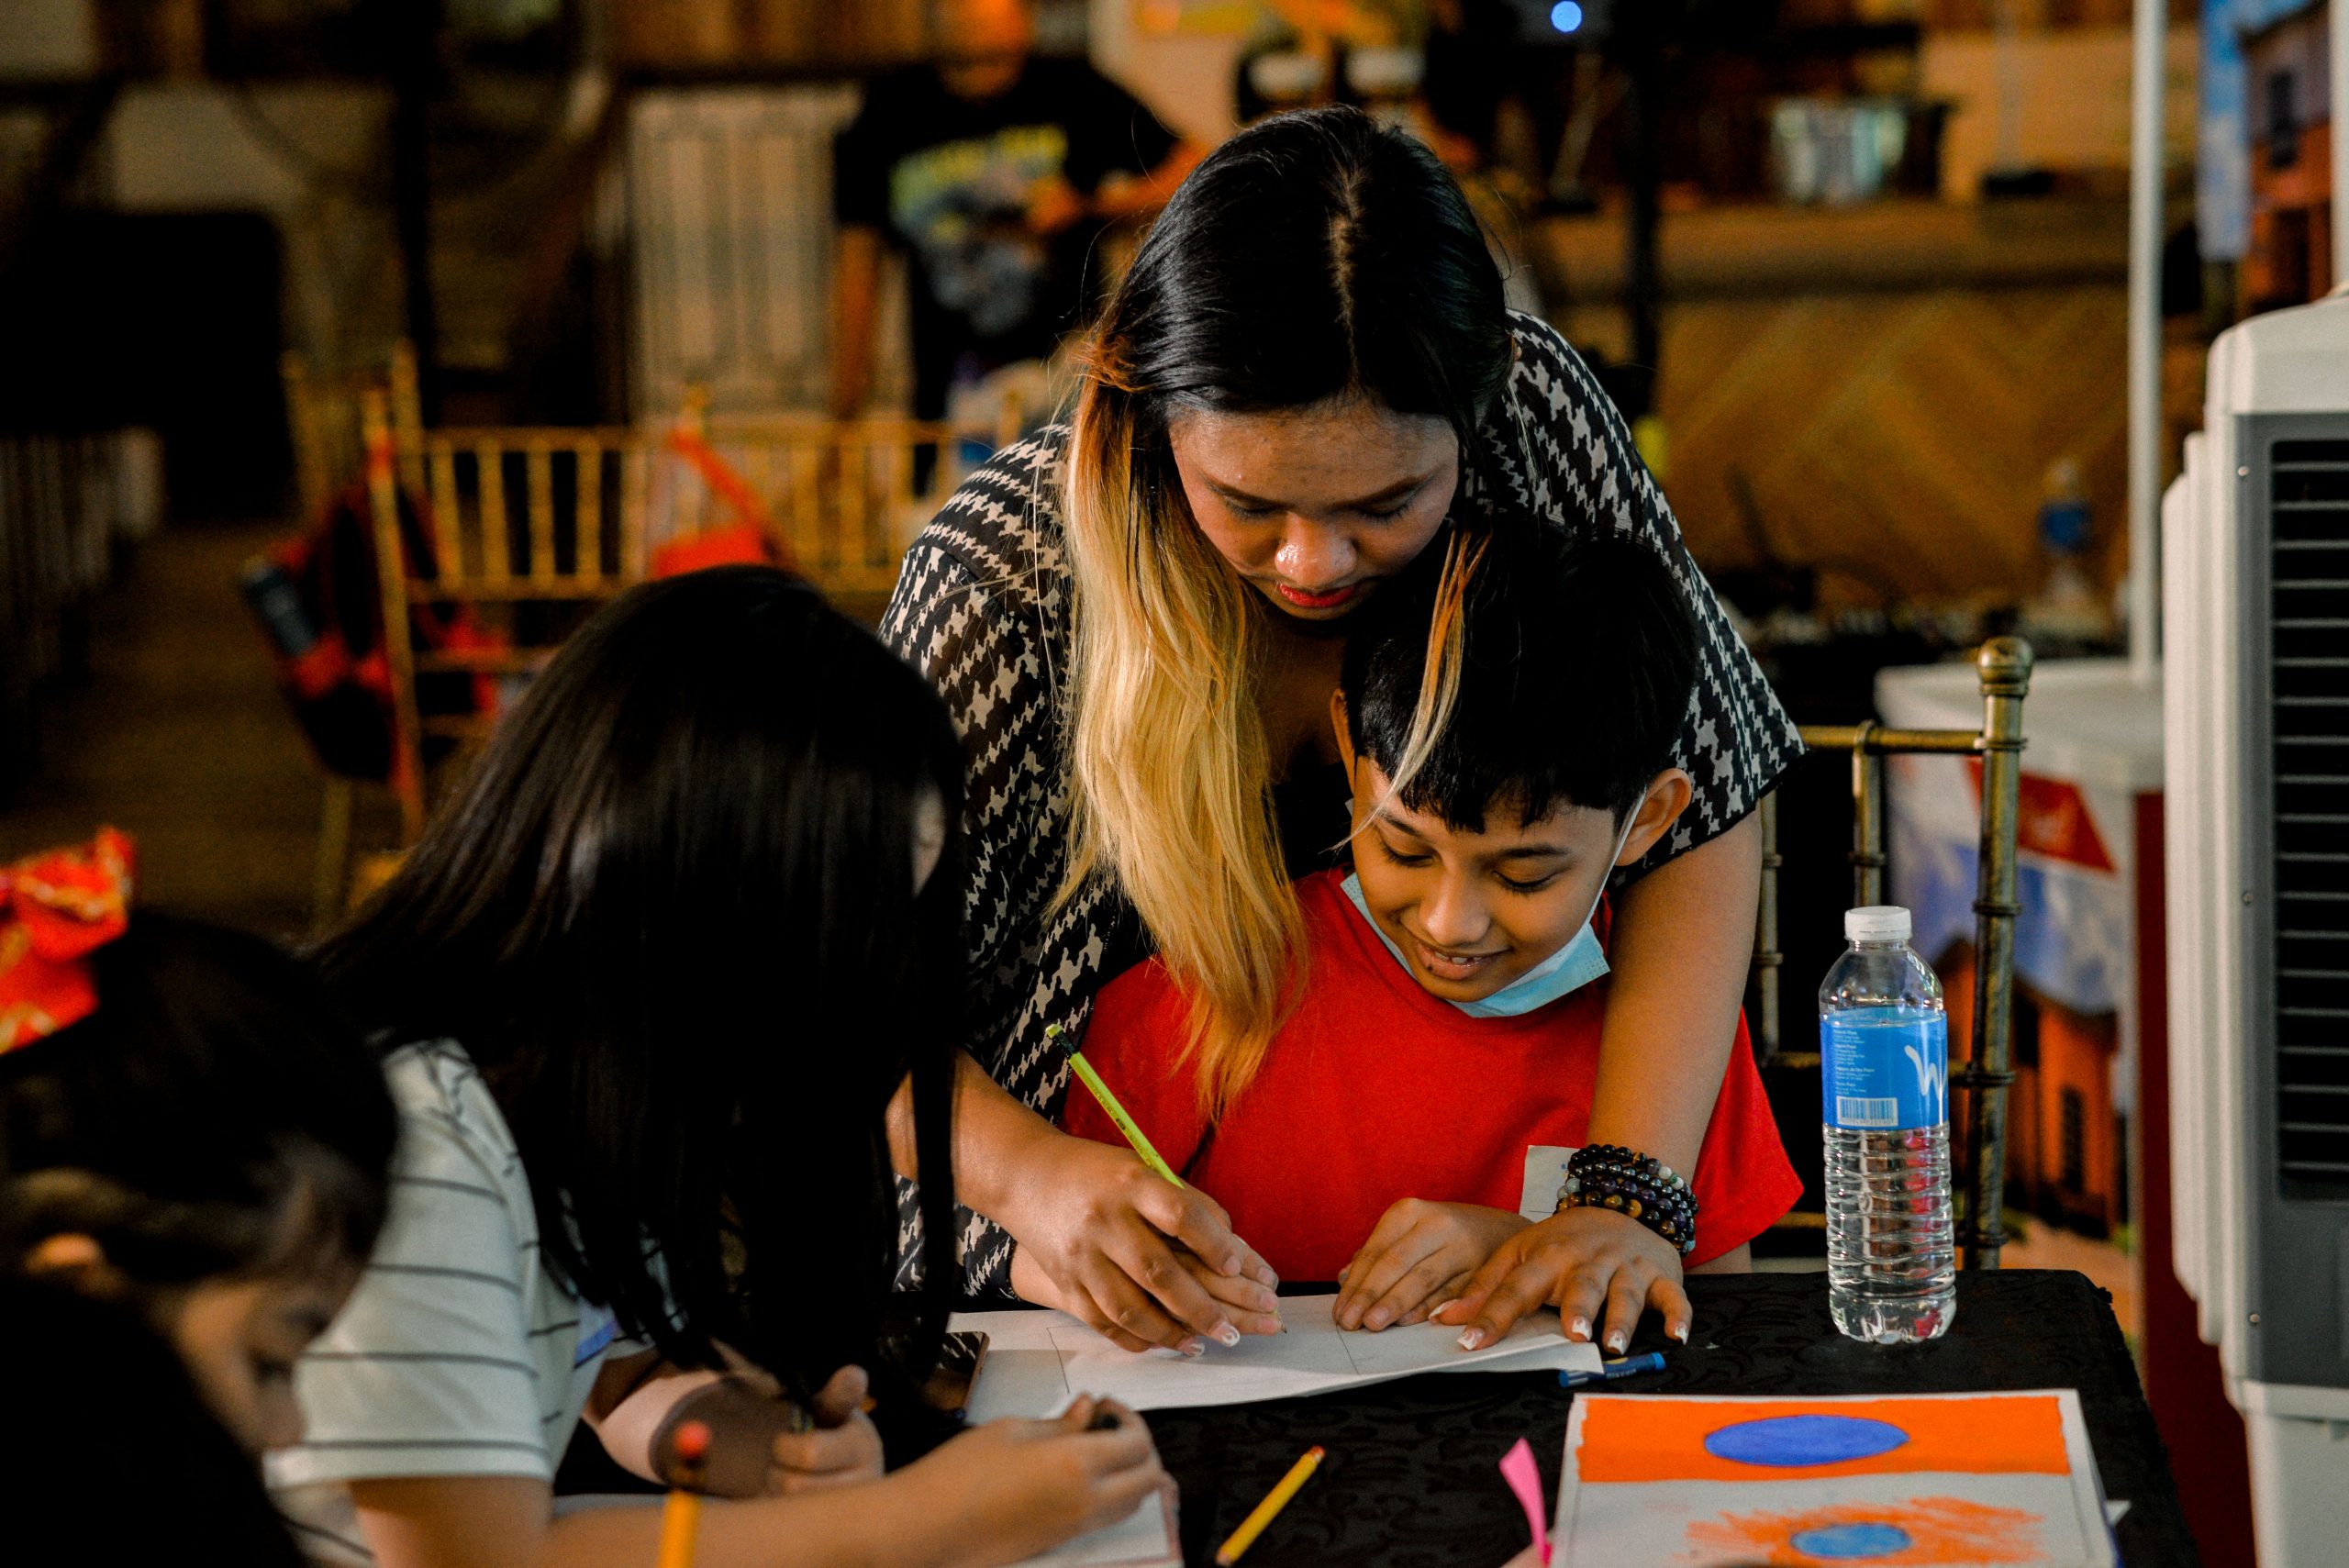 This is Mommy Leigh Cadiente with her son enjoying the illustration class.